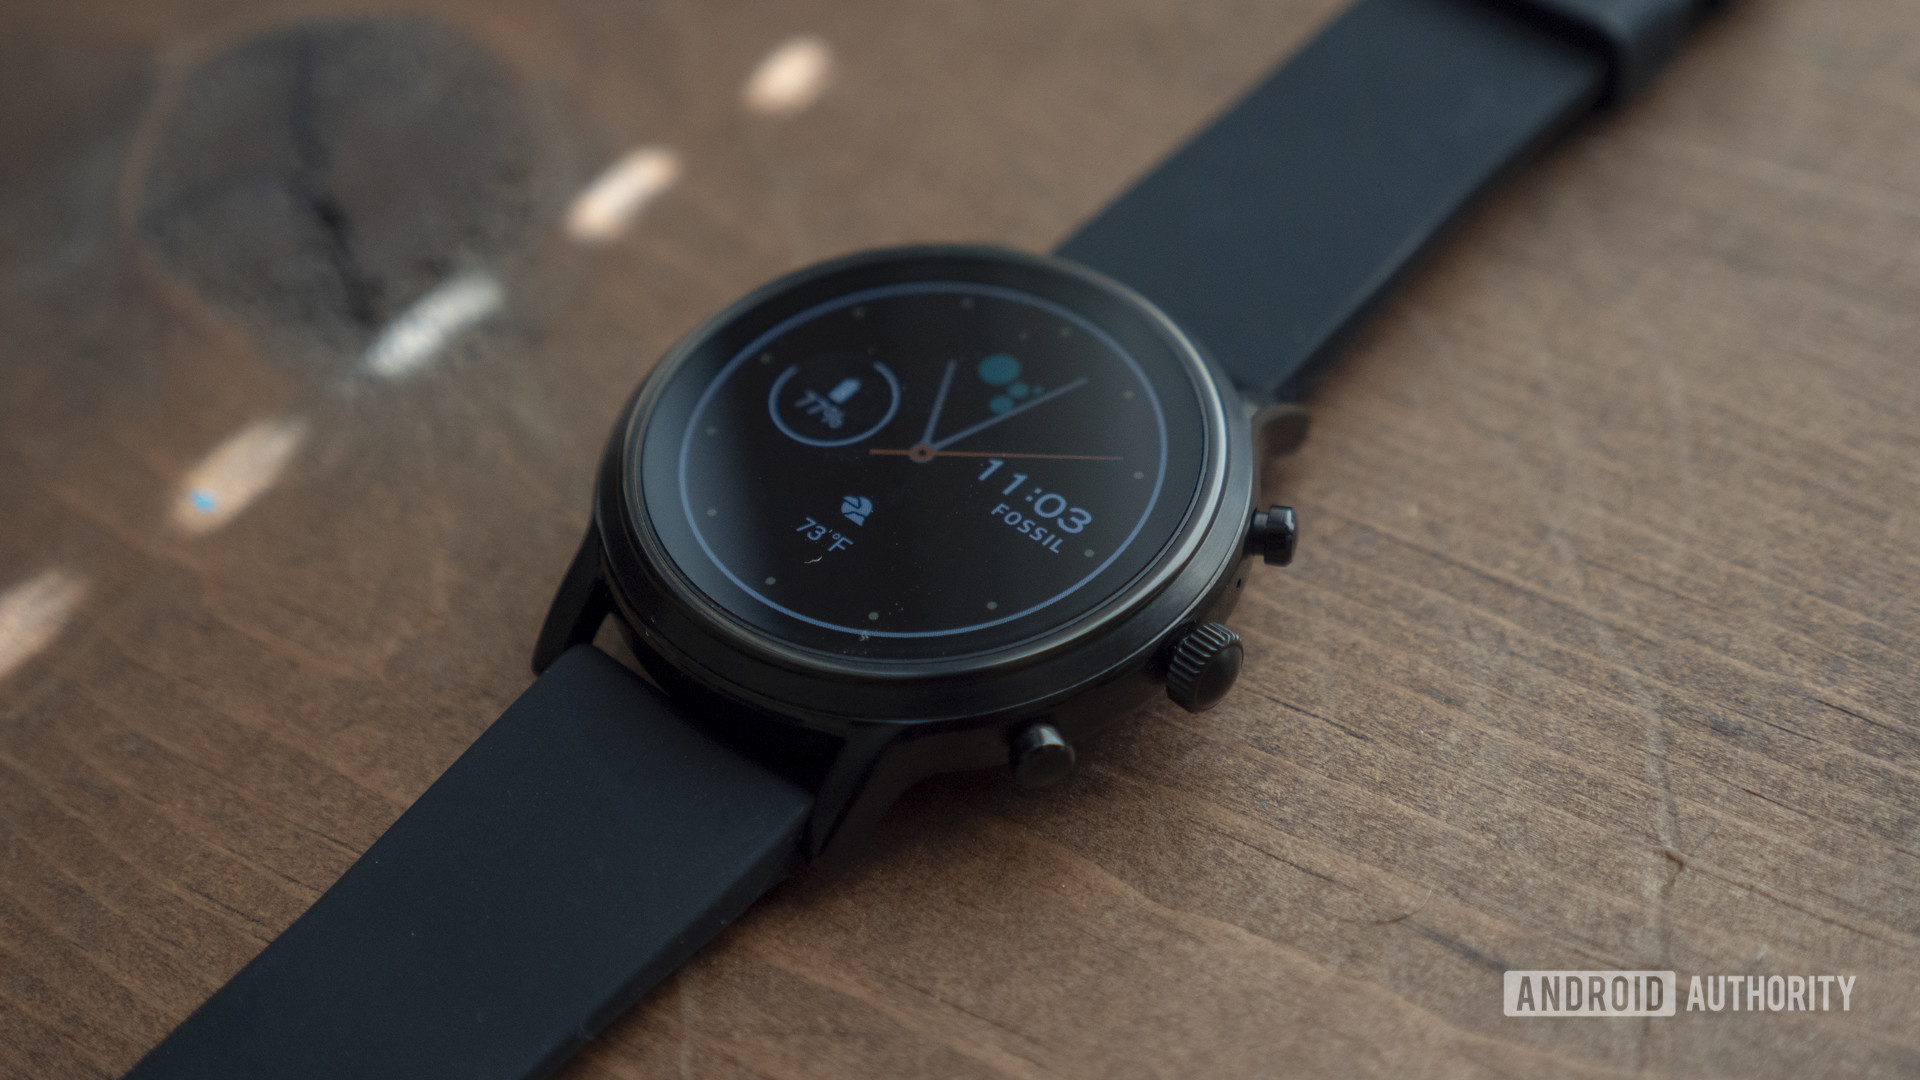 A Fossil Gen 5 fashion smartwatch rests on a wooden surface displaying its watch face.